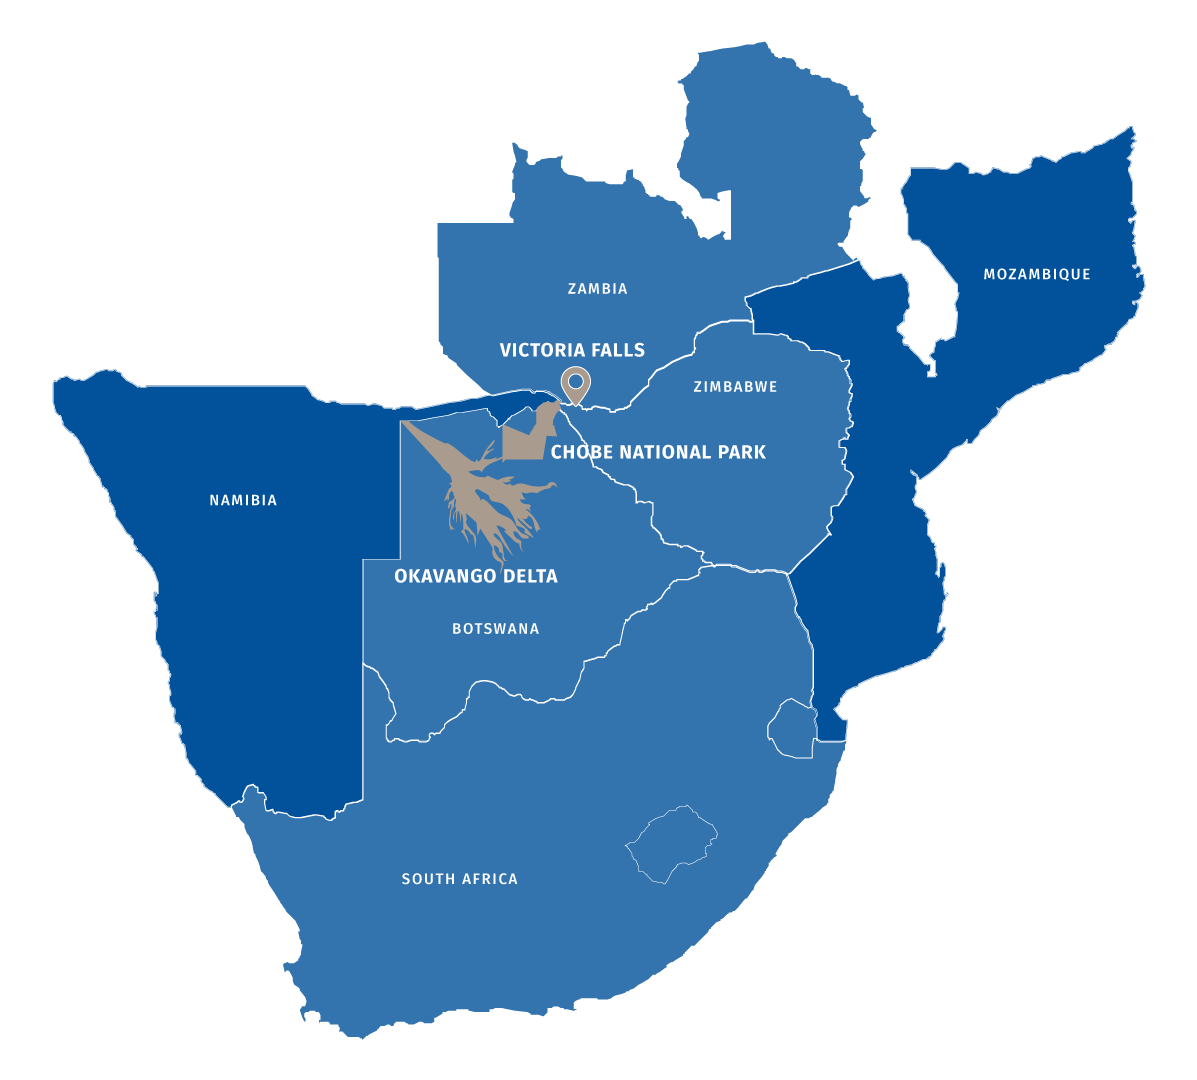 Southern Africa